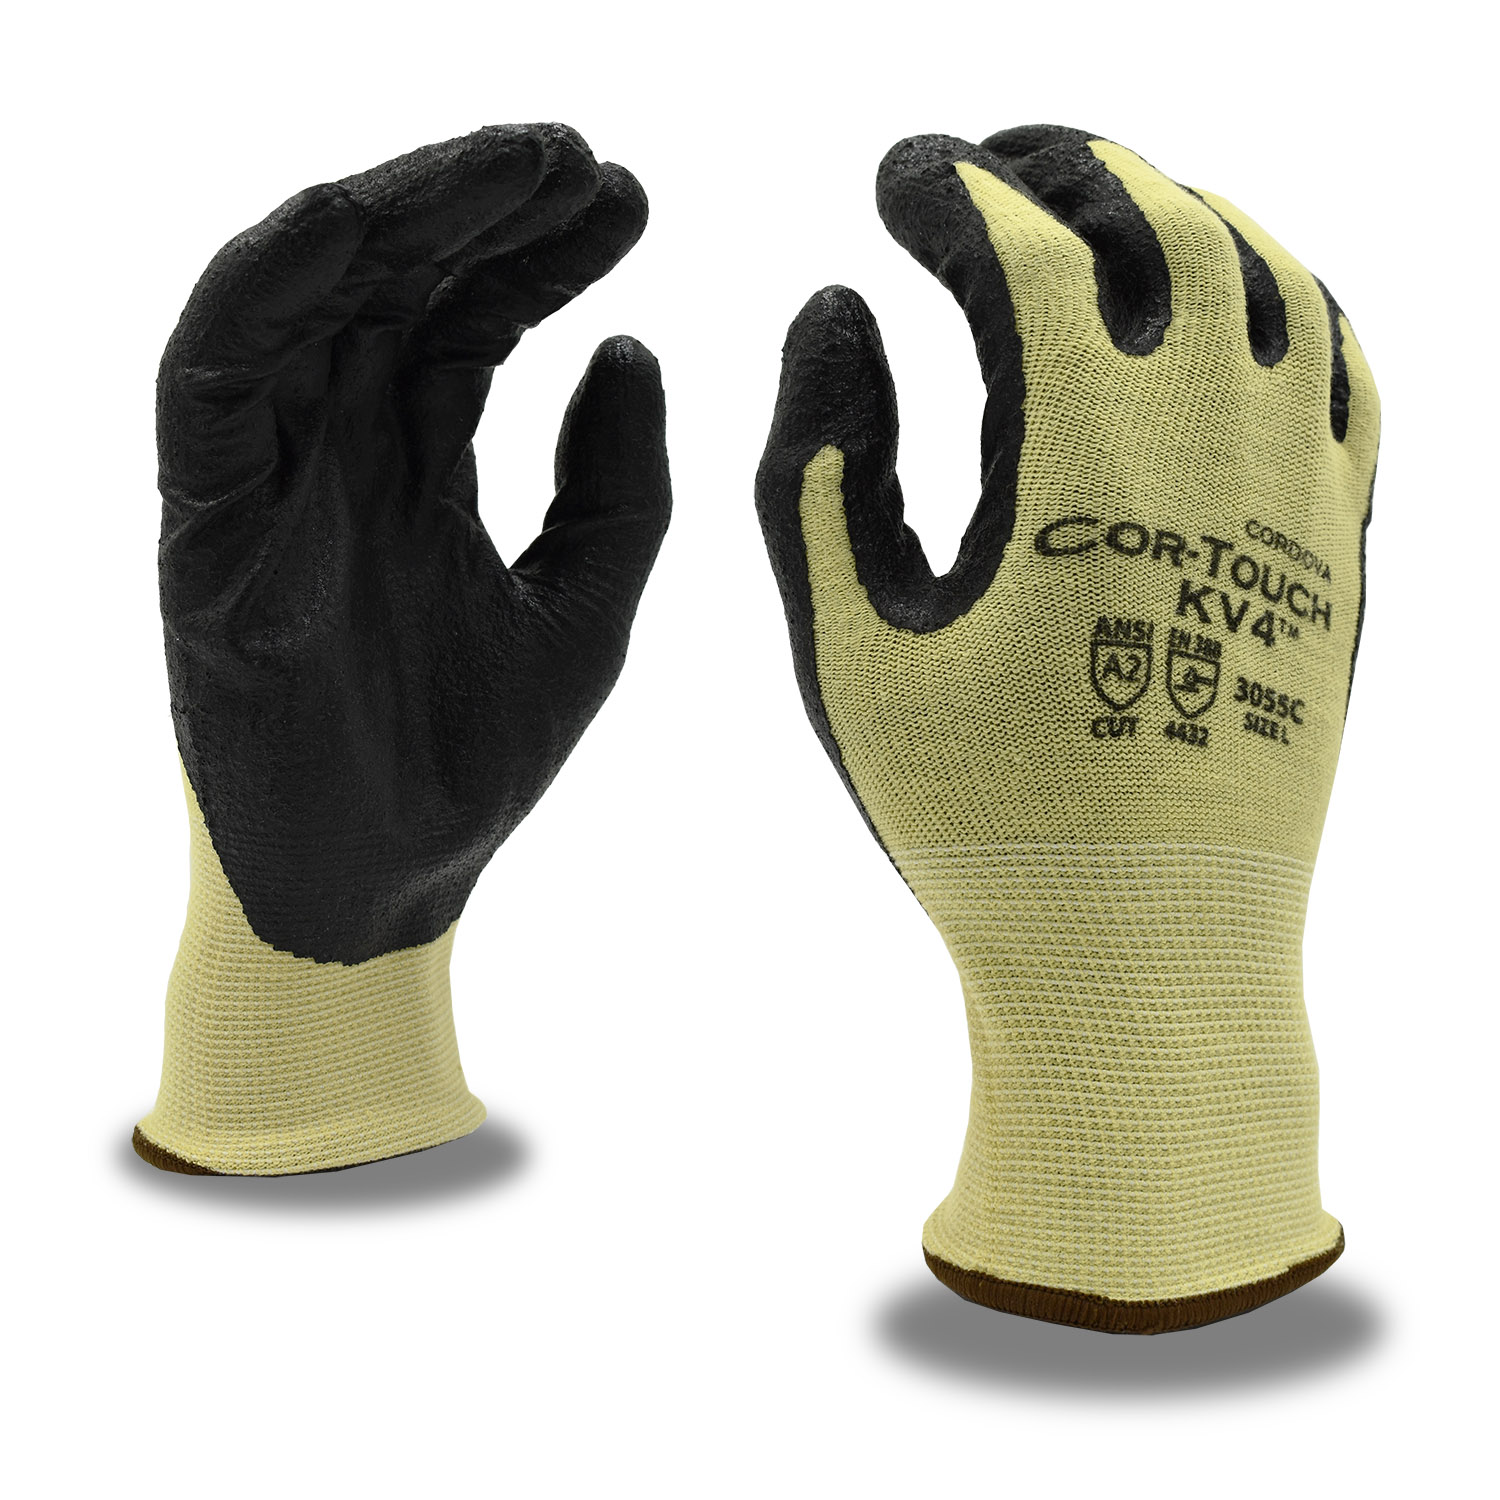 COR-TOUCH KV4 NITRILE PALM COATED - Tagged Gloves